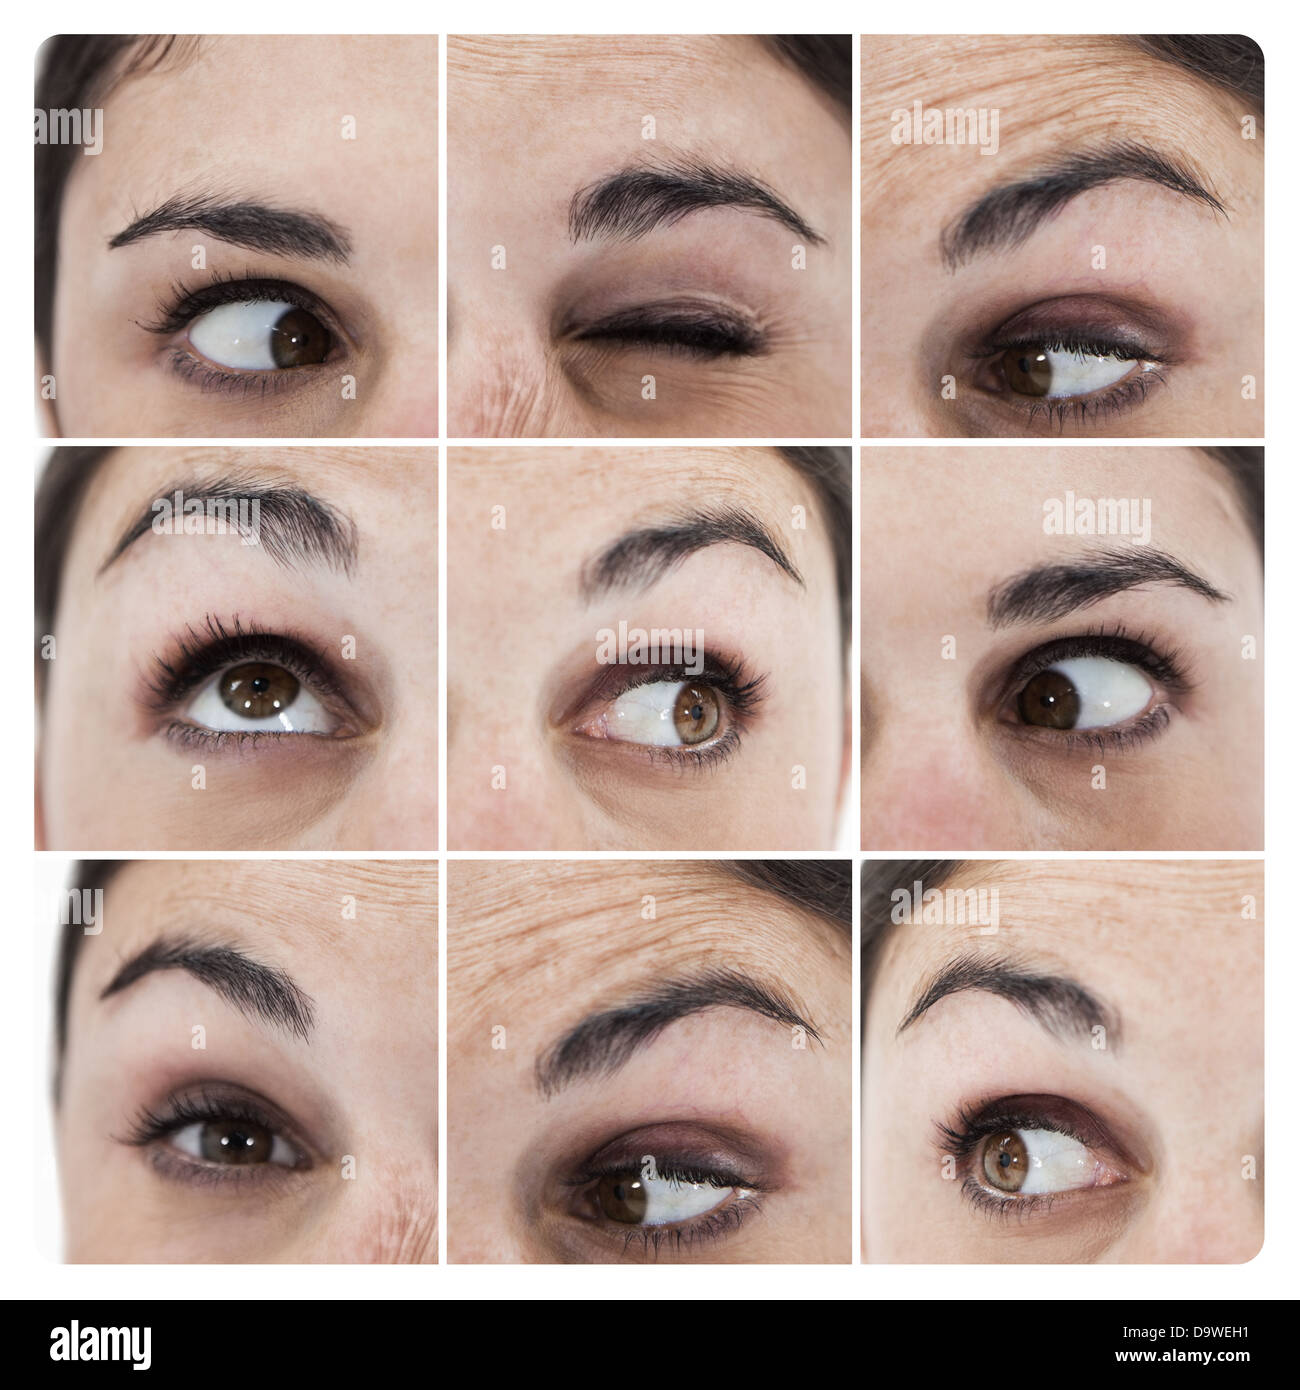 Collage of various pictures showing the eyes of a woman Stock Photo